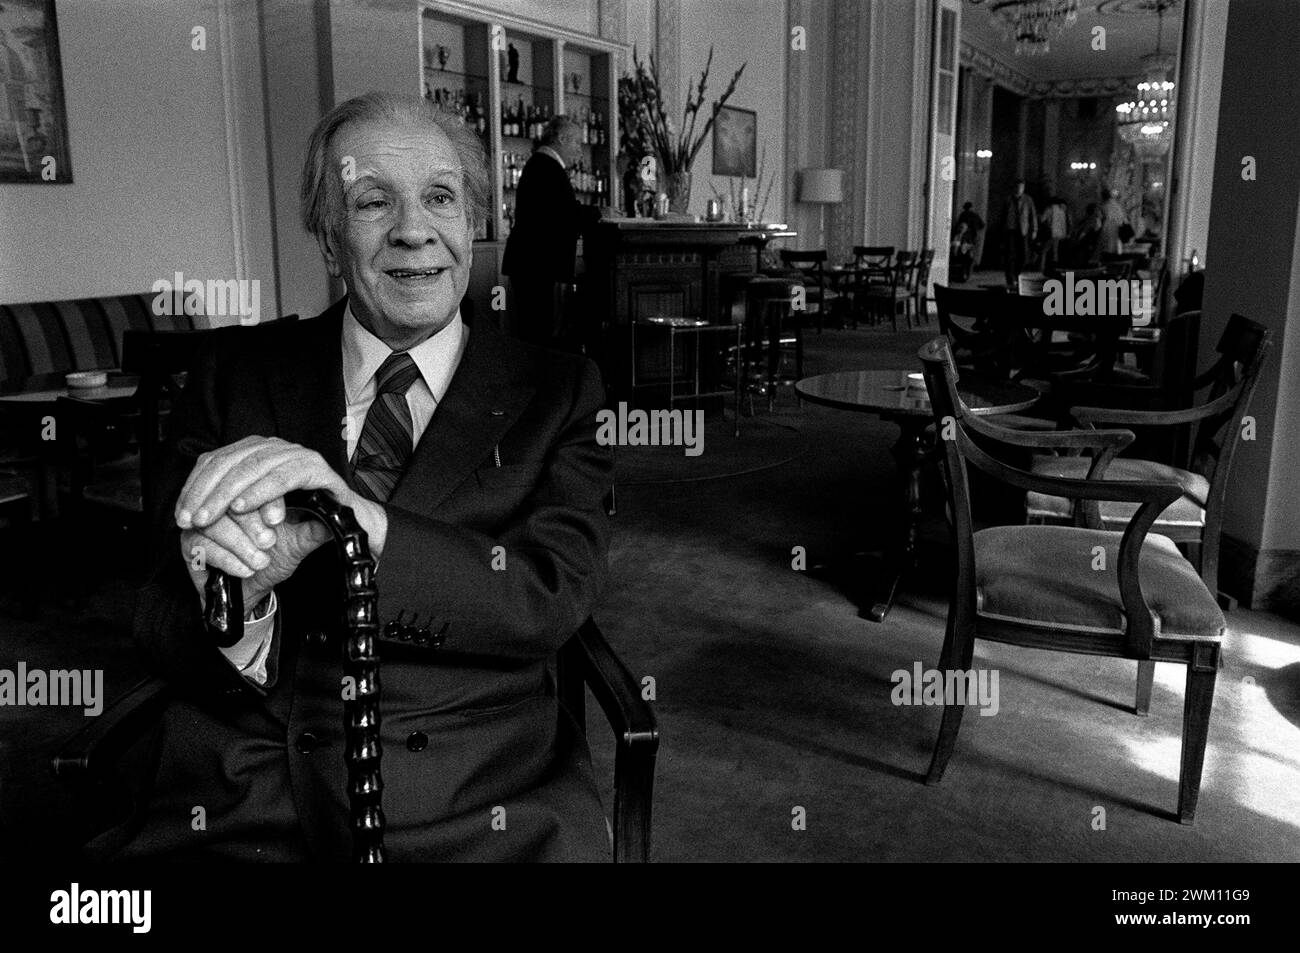 3825274 Jorge Luis Borges; (add.info.: Rome, Westin Excelsior Hotel, 1981. Argentinian writer Jorge Luis Borges / Roma, Hotel Westin Excelsior, 1981. Lo scrittore argentino Jorge Luis Borges); © Marcello Mencarini. All rights reserved 2024. Stock Photo